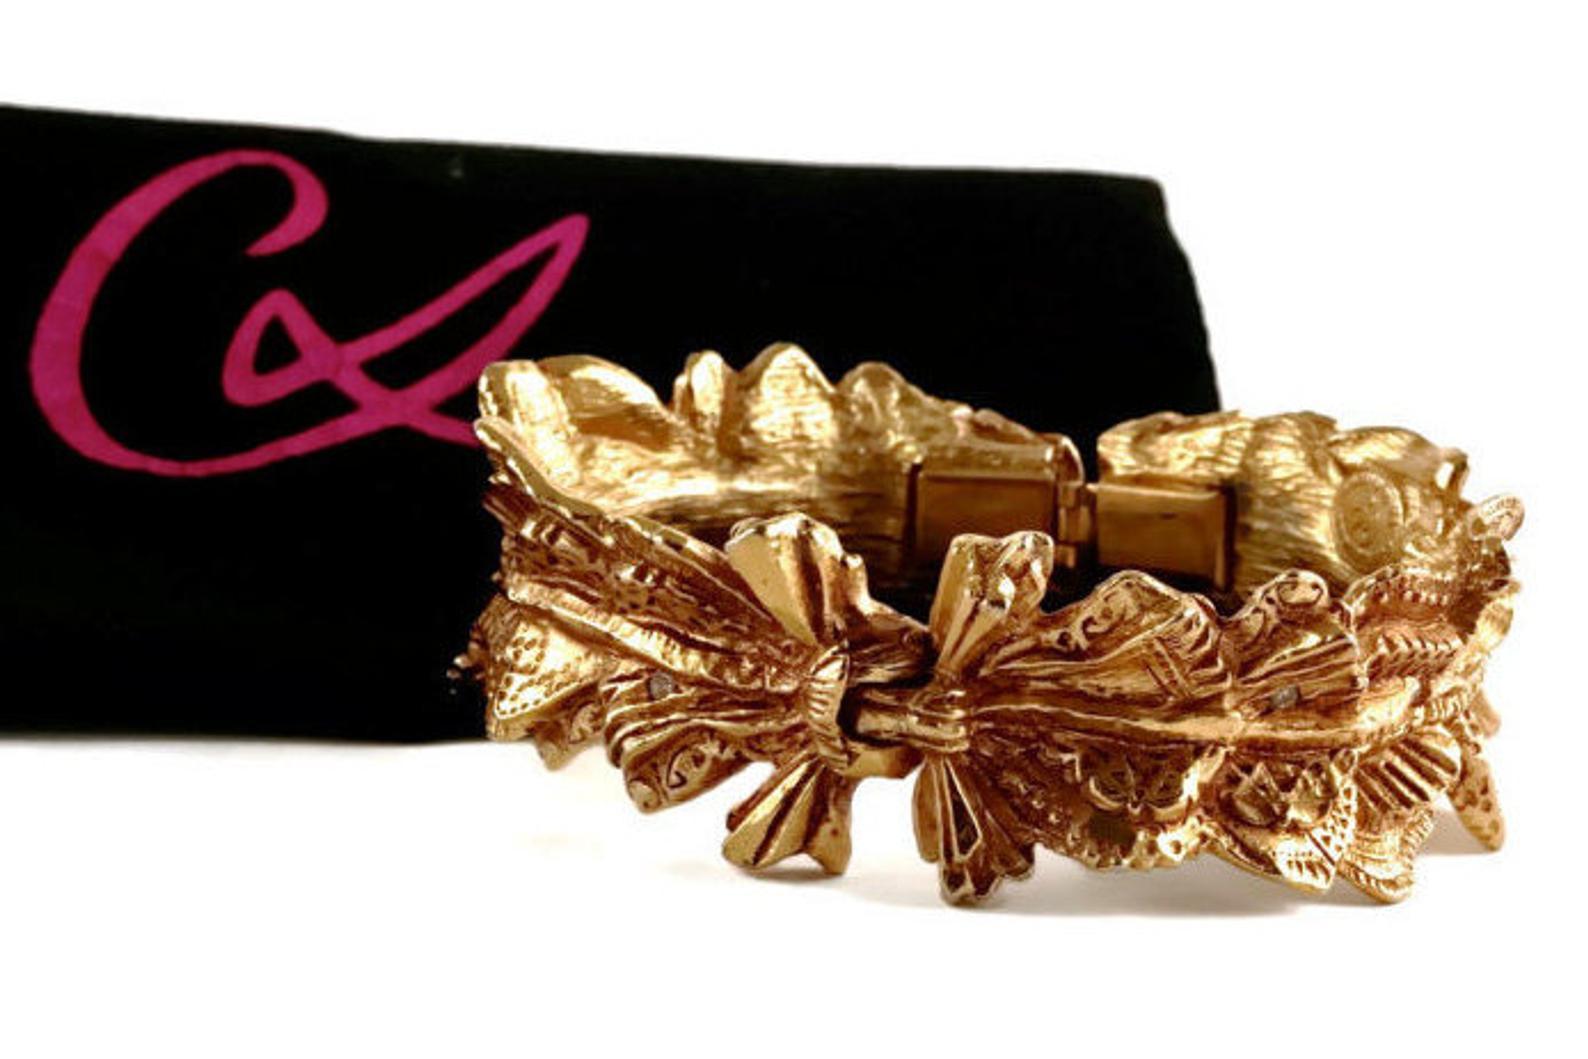 Vintage CHRISTIAN LACROIX Bow Ribbon Textured Lace Pattern Rhinestone Clamper Cuff Bracelet

Measurements:
Height: 1 inch (2.54 cm)
Inner Diameter: 6 4/8 inches (16.51 cm)

Features:
- 100% Authentic CHRISTIAN LACROIX.
- Textured bow/ ribbon in lace